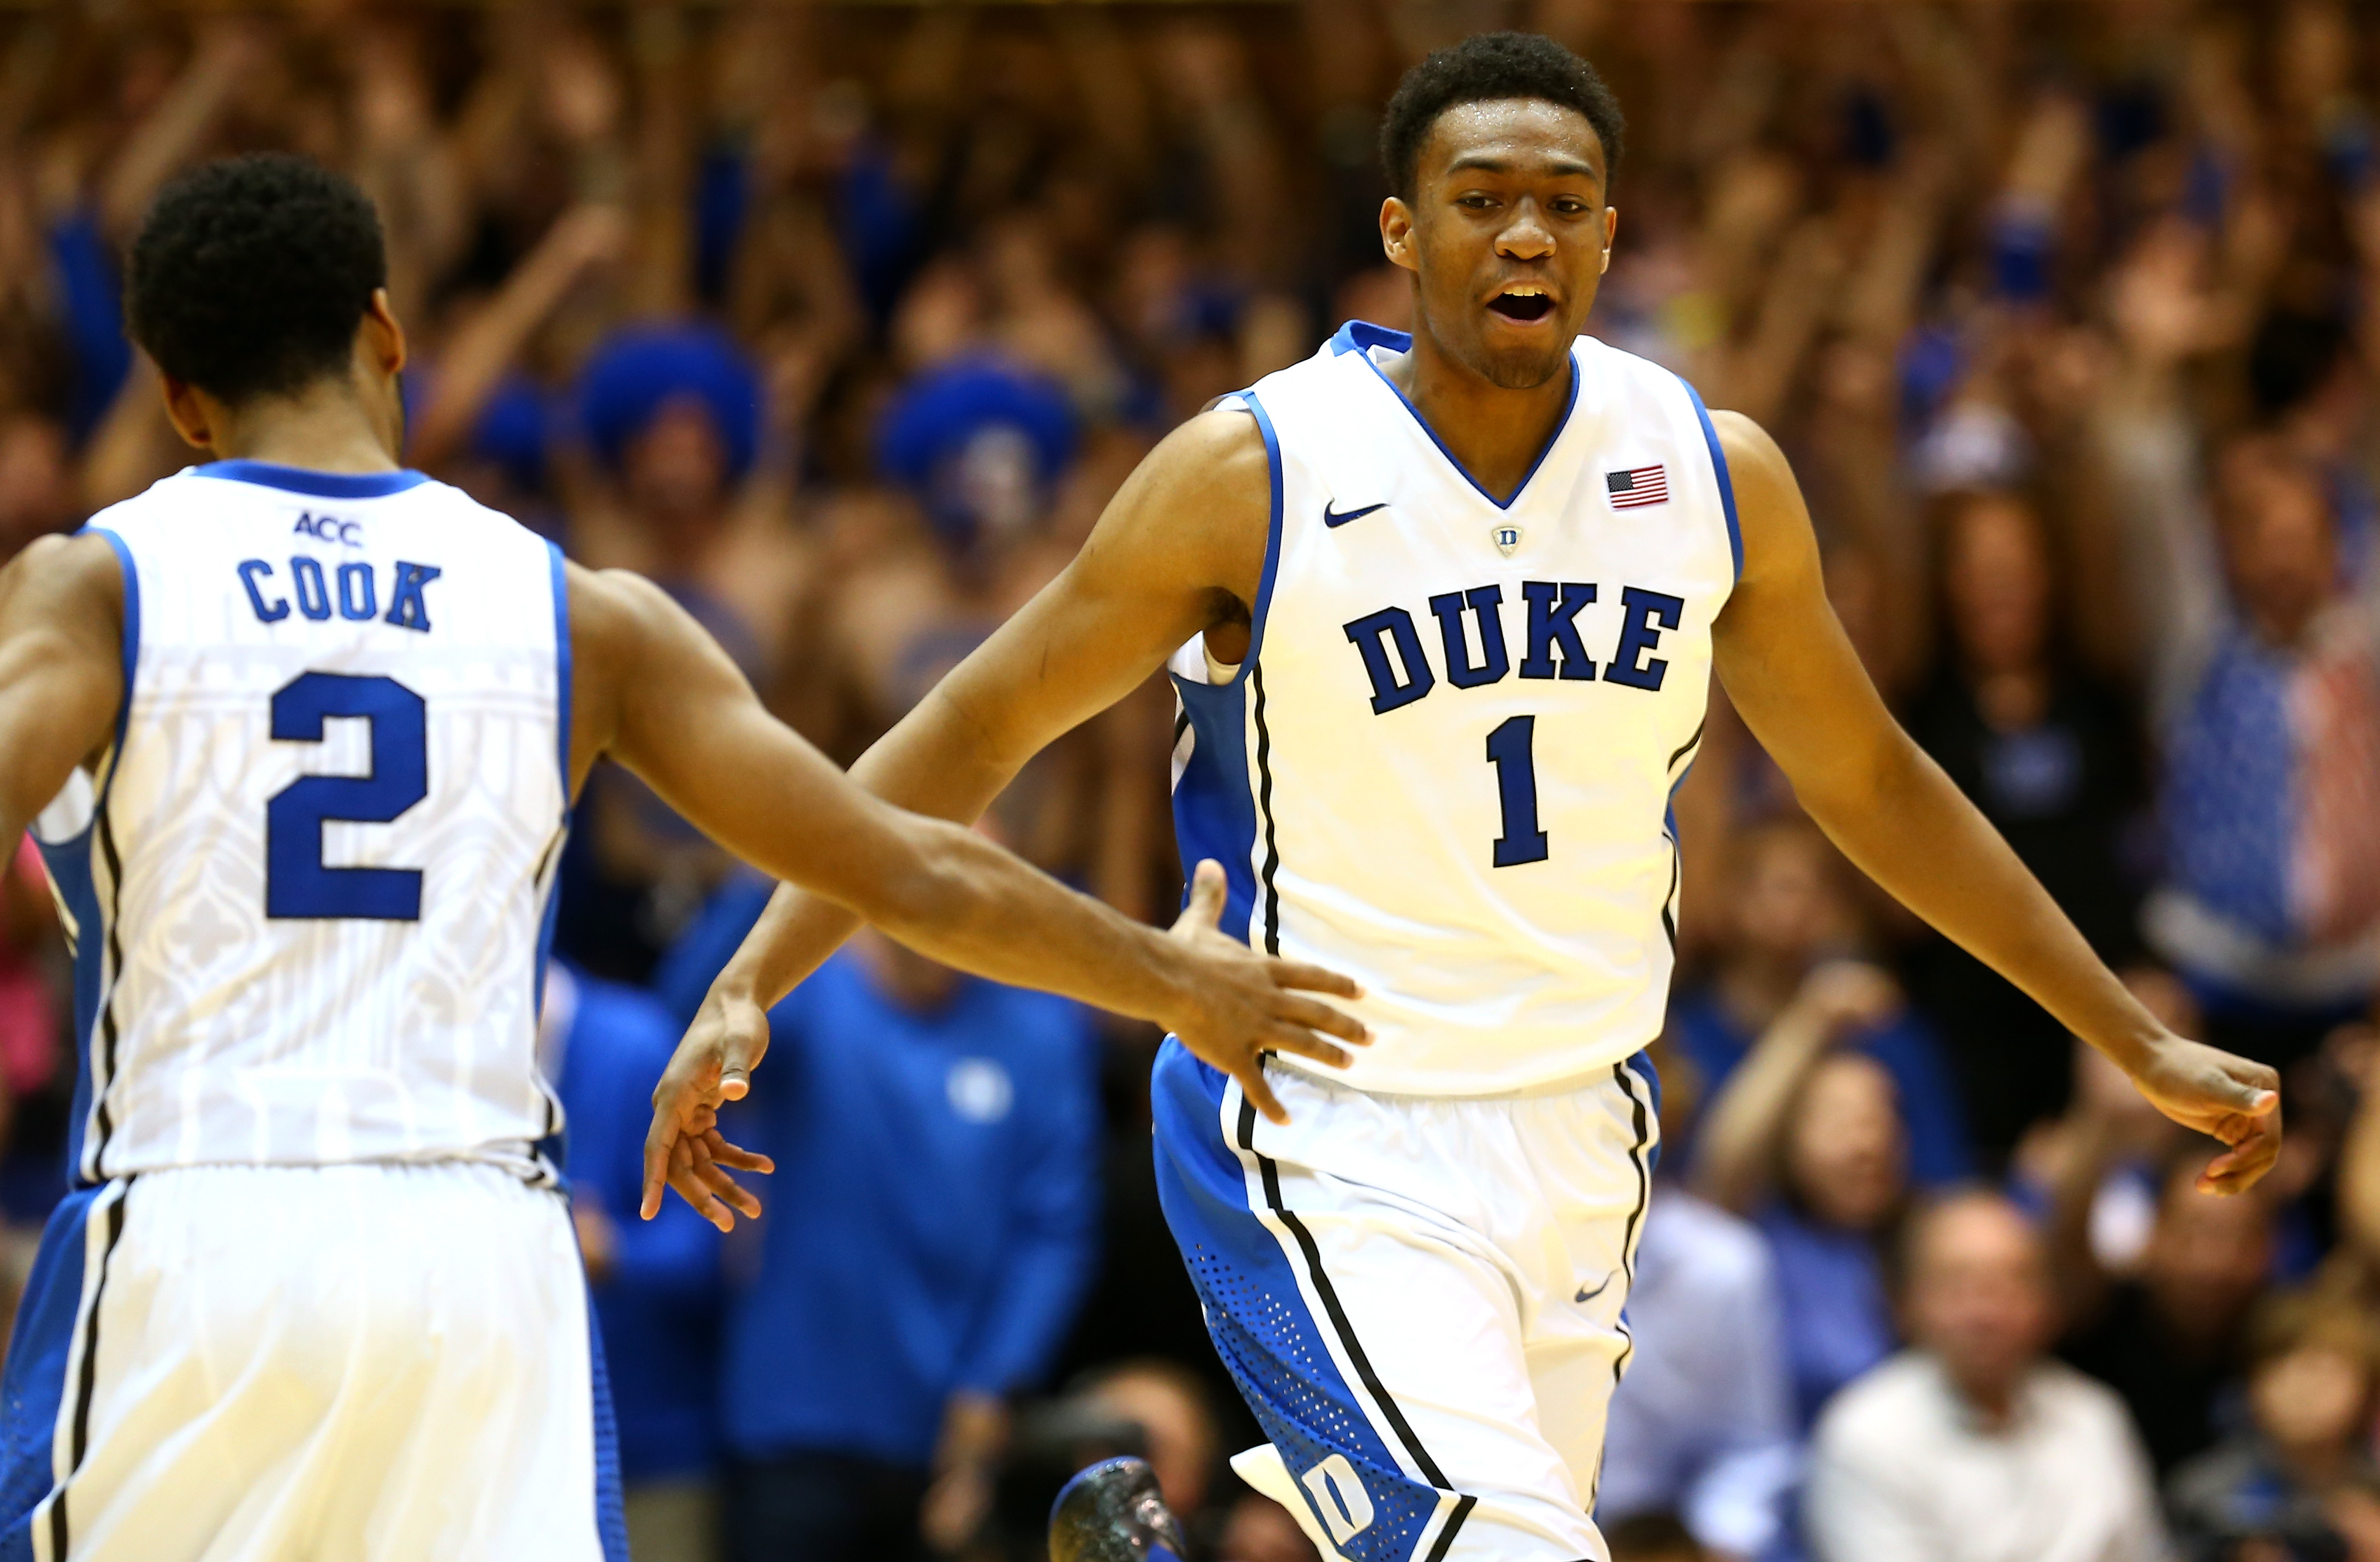 Jabari Parker puts on first of likely many great performances at